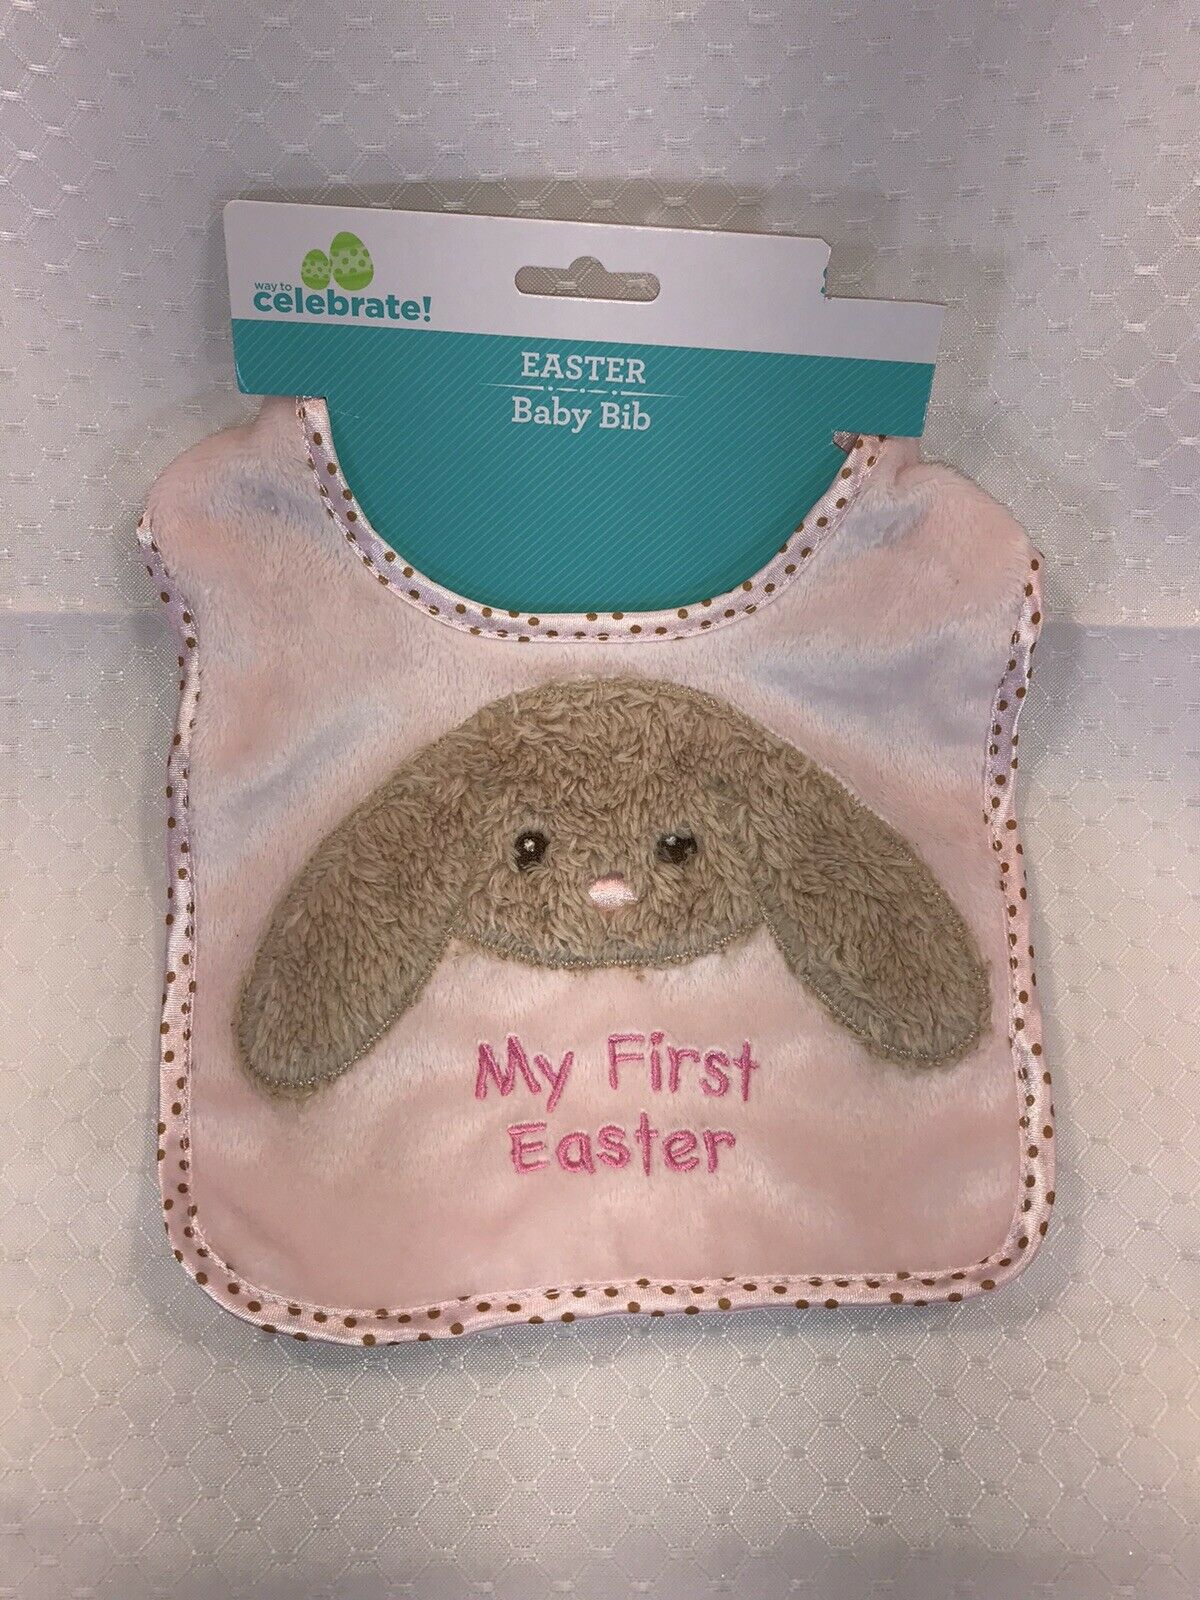 Dan Dee "my First Easter" Girls Baby Bib Pink And Brown Bunny Way To Celebrate